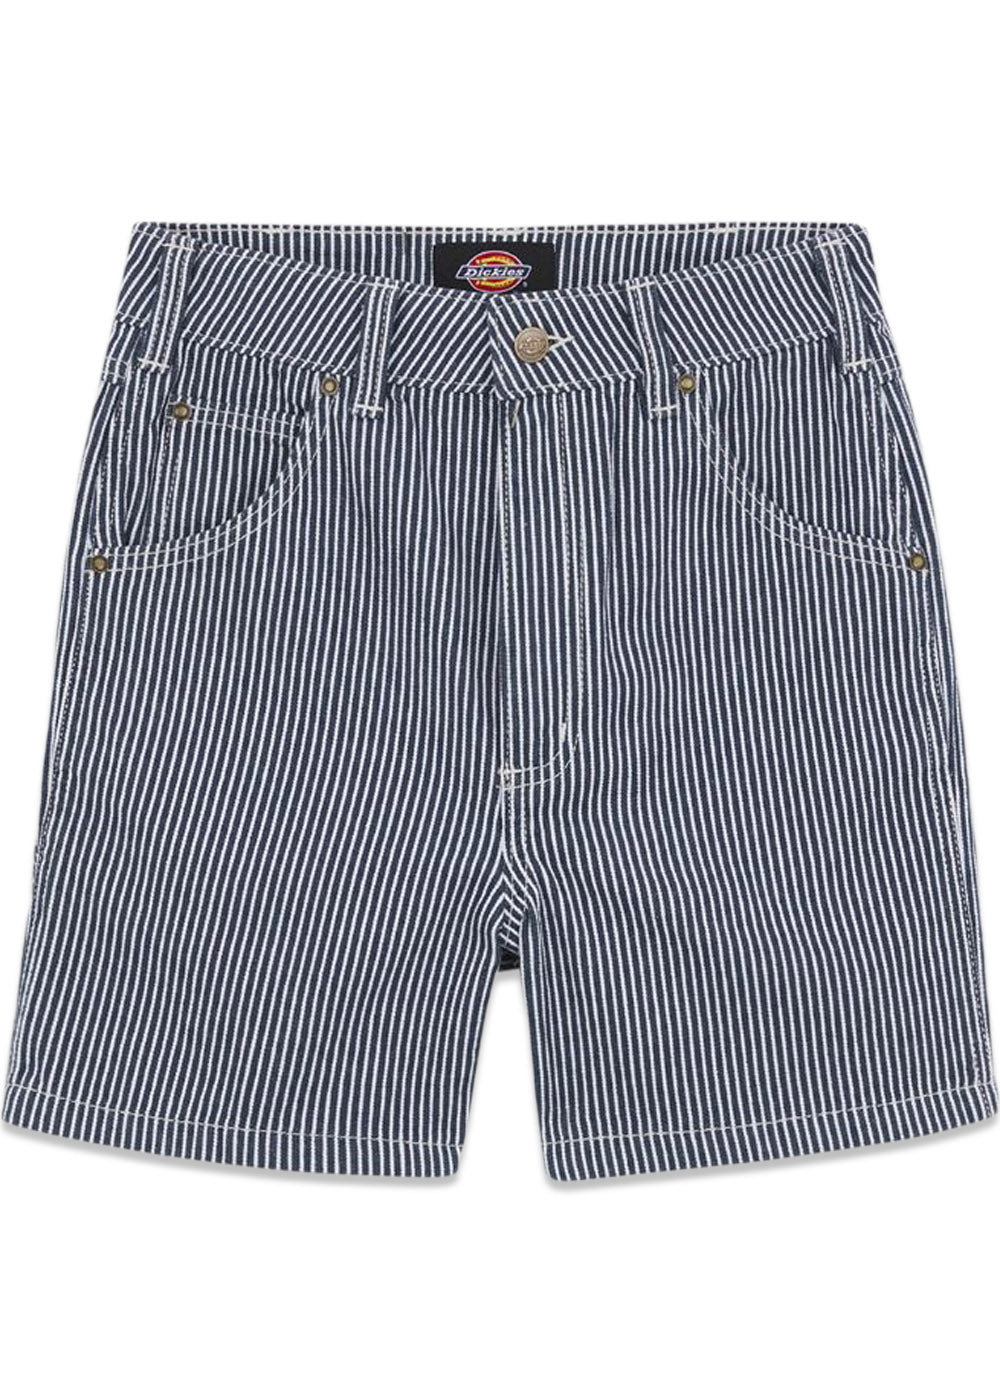 Dickies' Hickory - Blue/White. Køb shorts her.